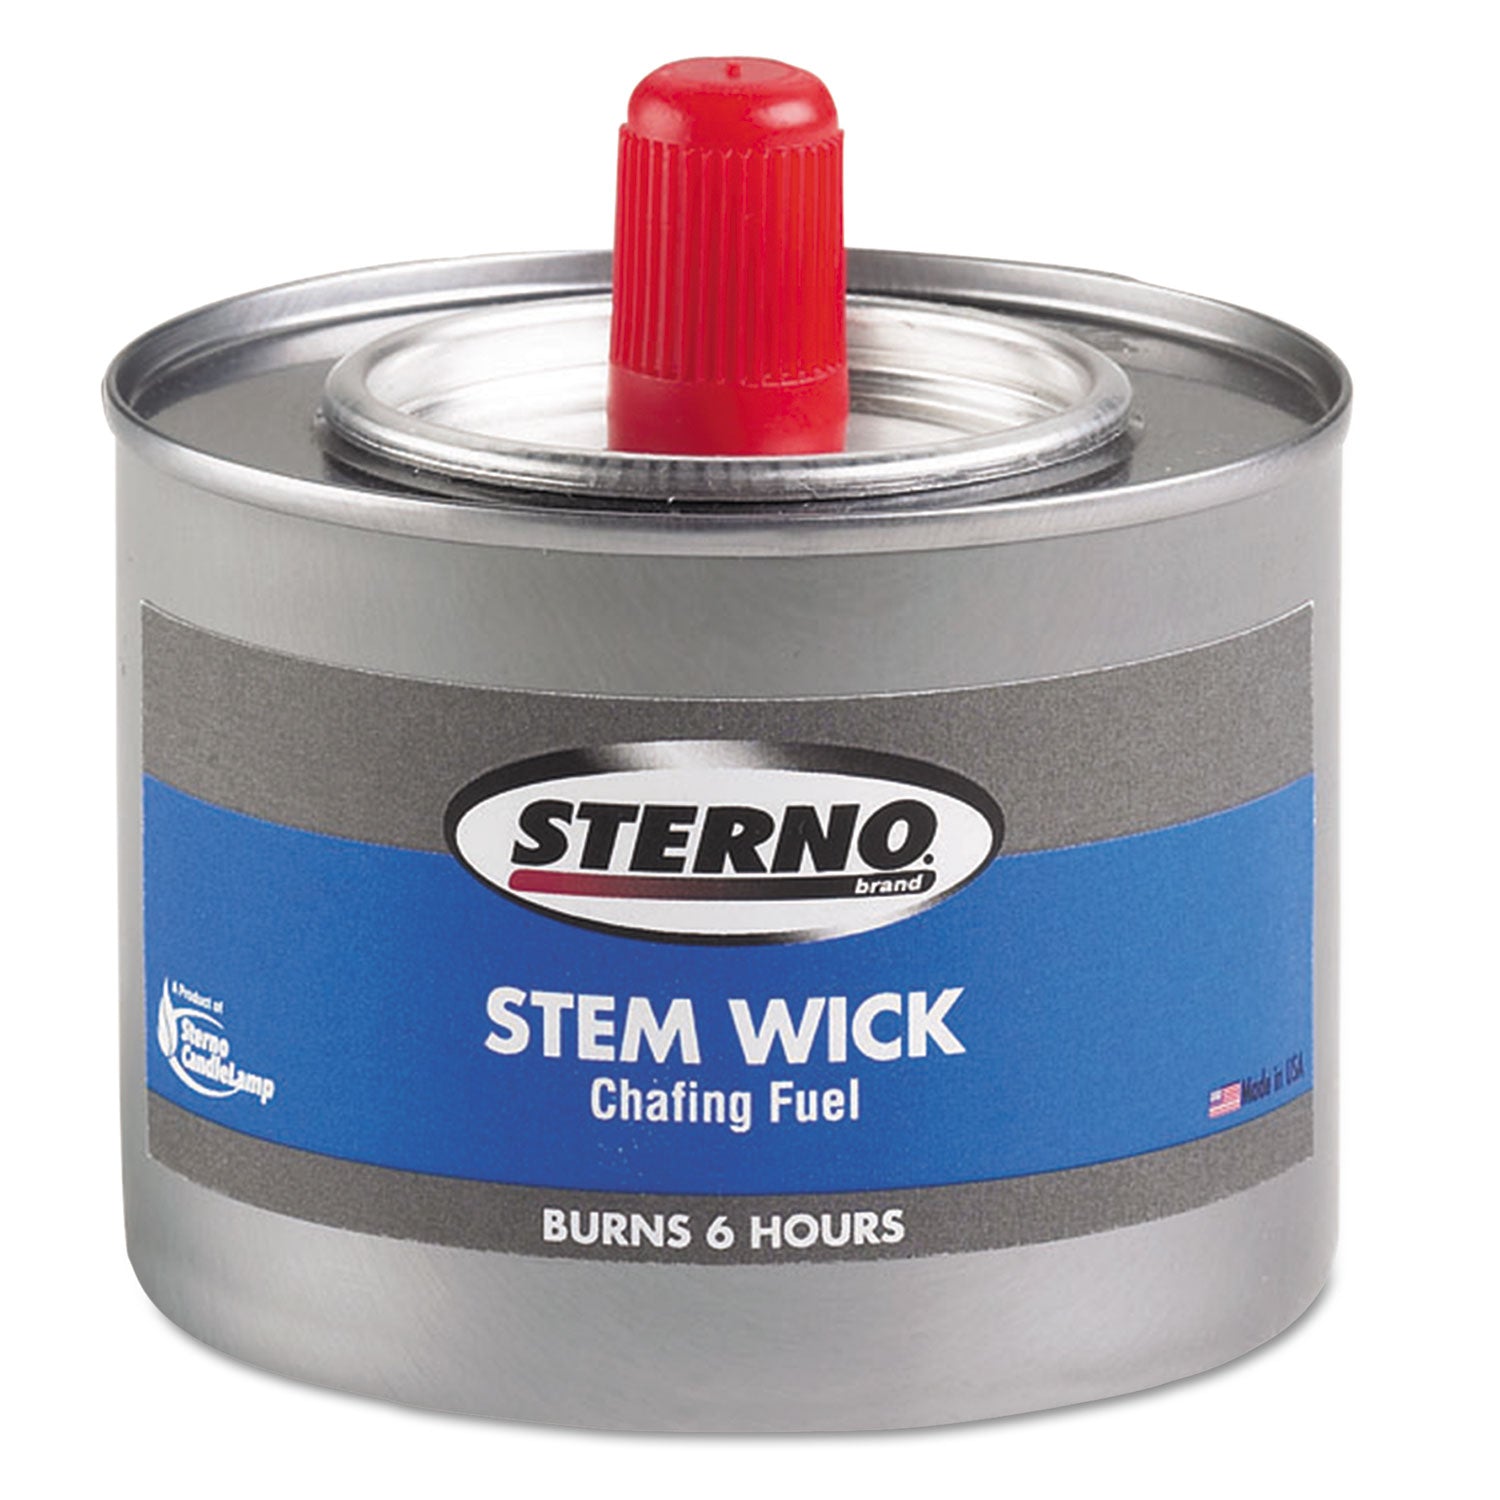 chafing-fuel-can-with-stem-wick-methanol-6-hour-burn-189-g-24-carton_ste10102 - 1